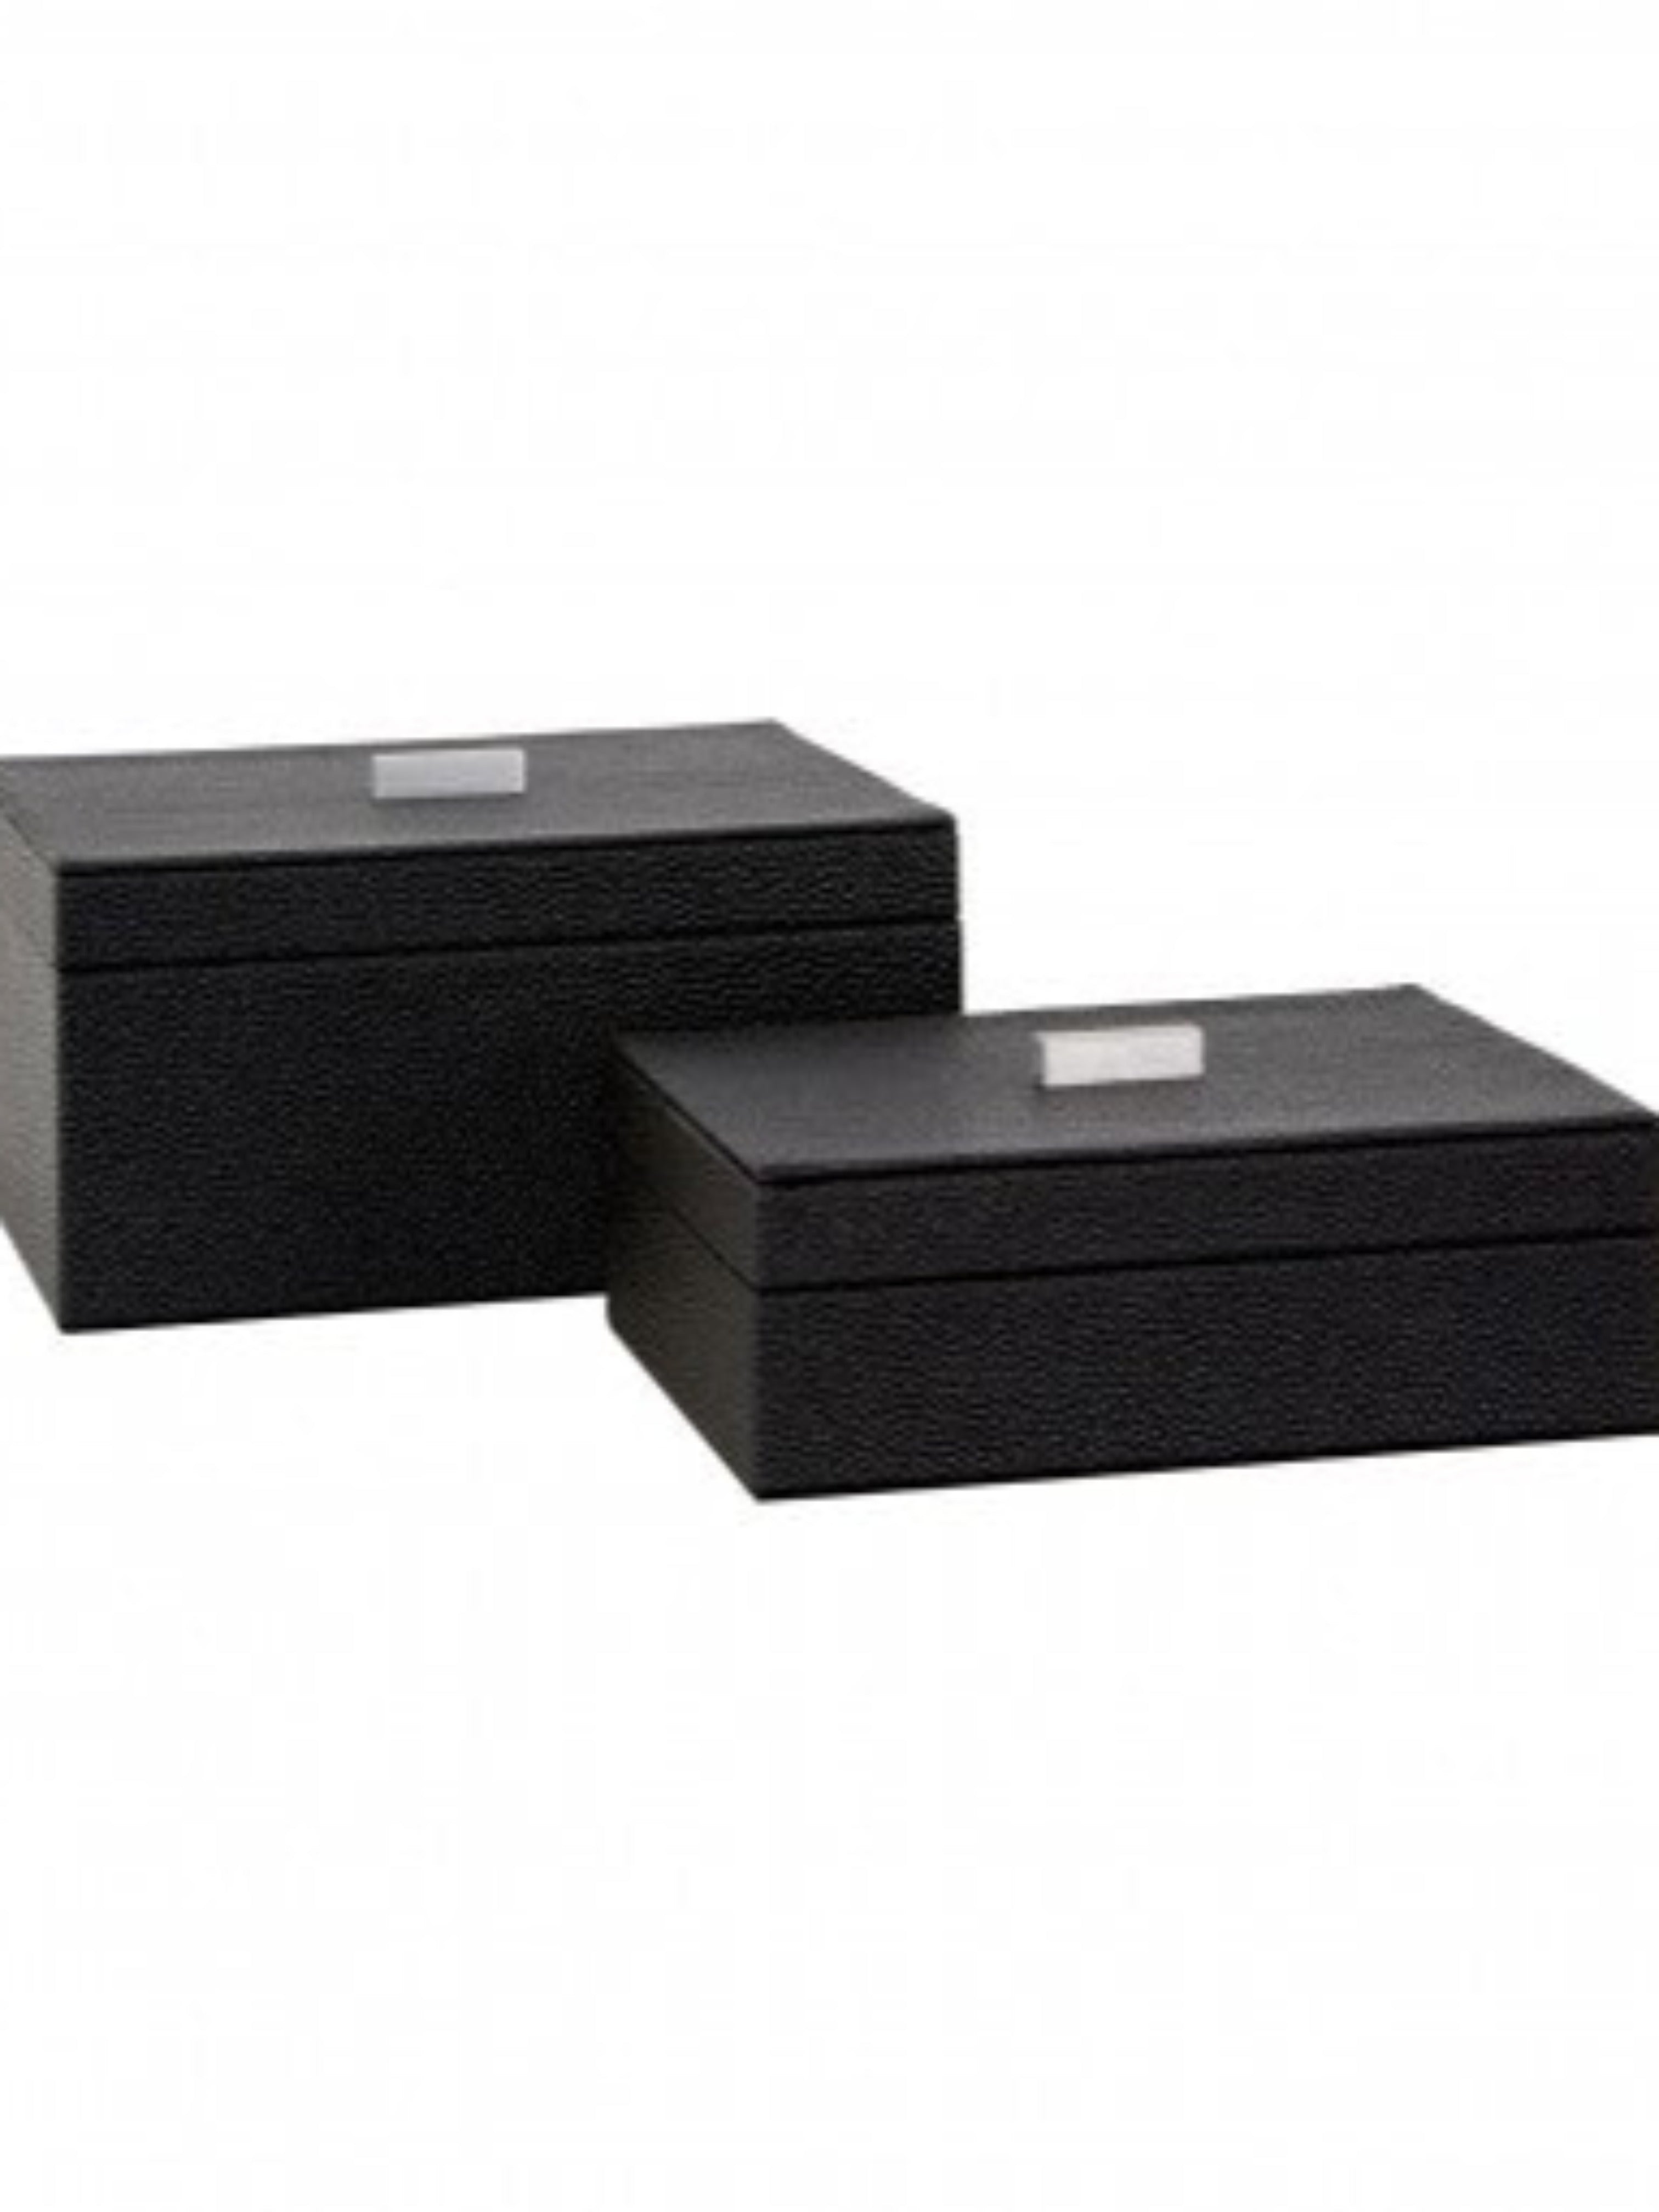 Opulent Earring Boxes, Metallic Faux Leather Gift Boxes